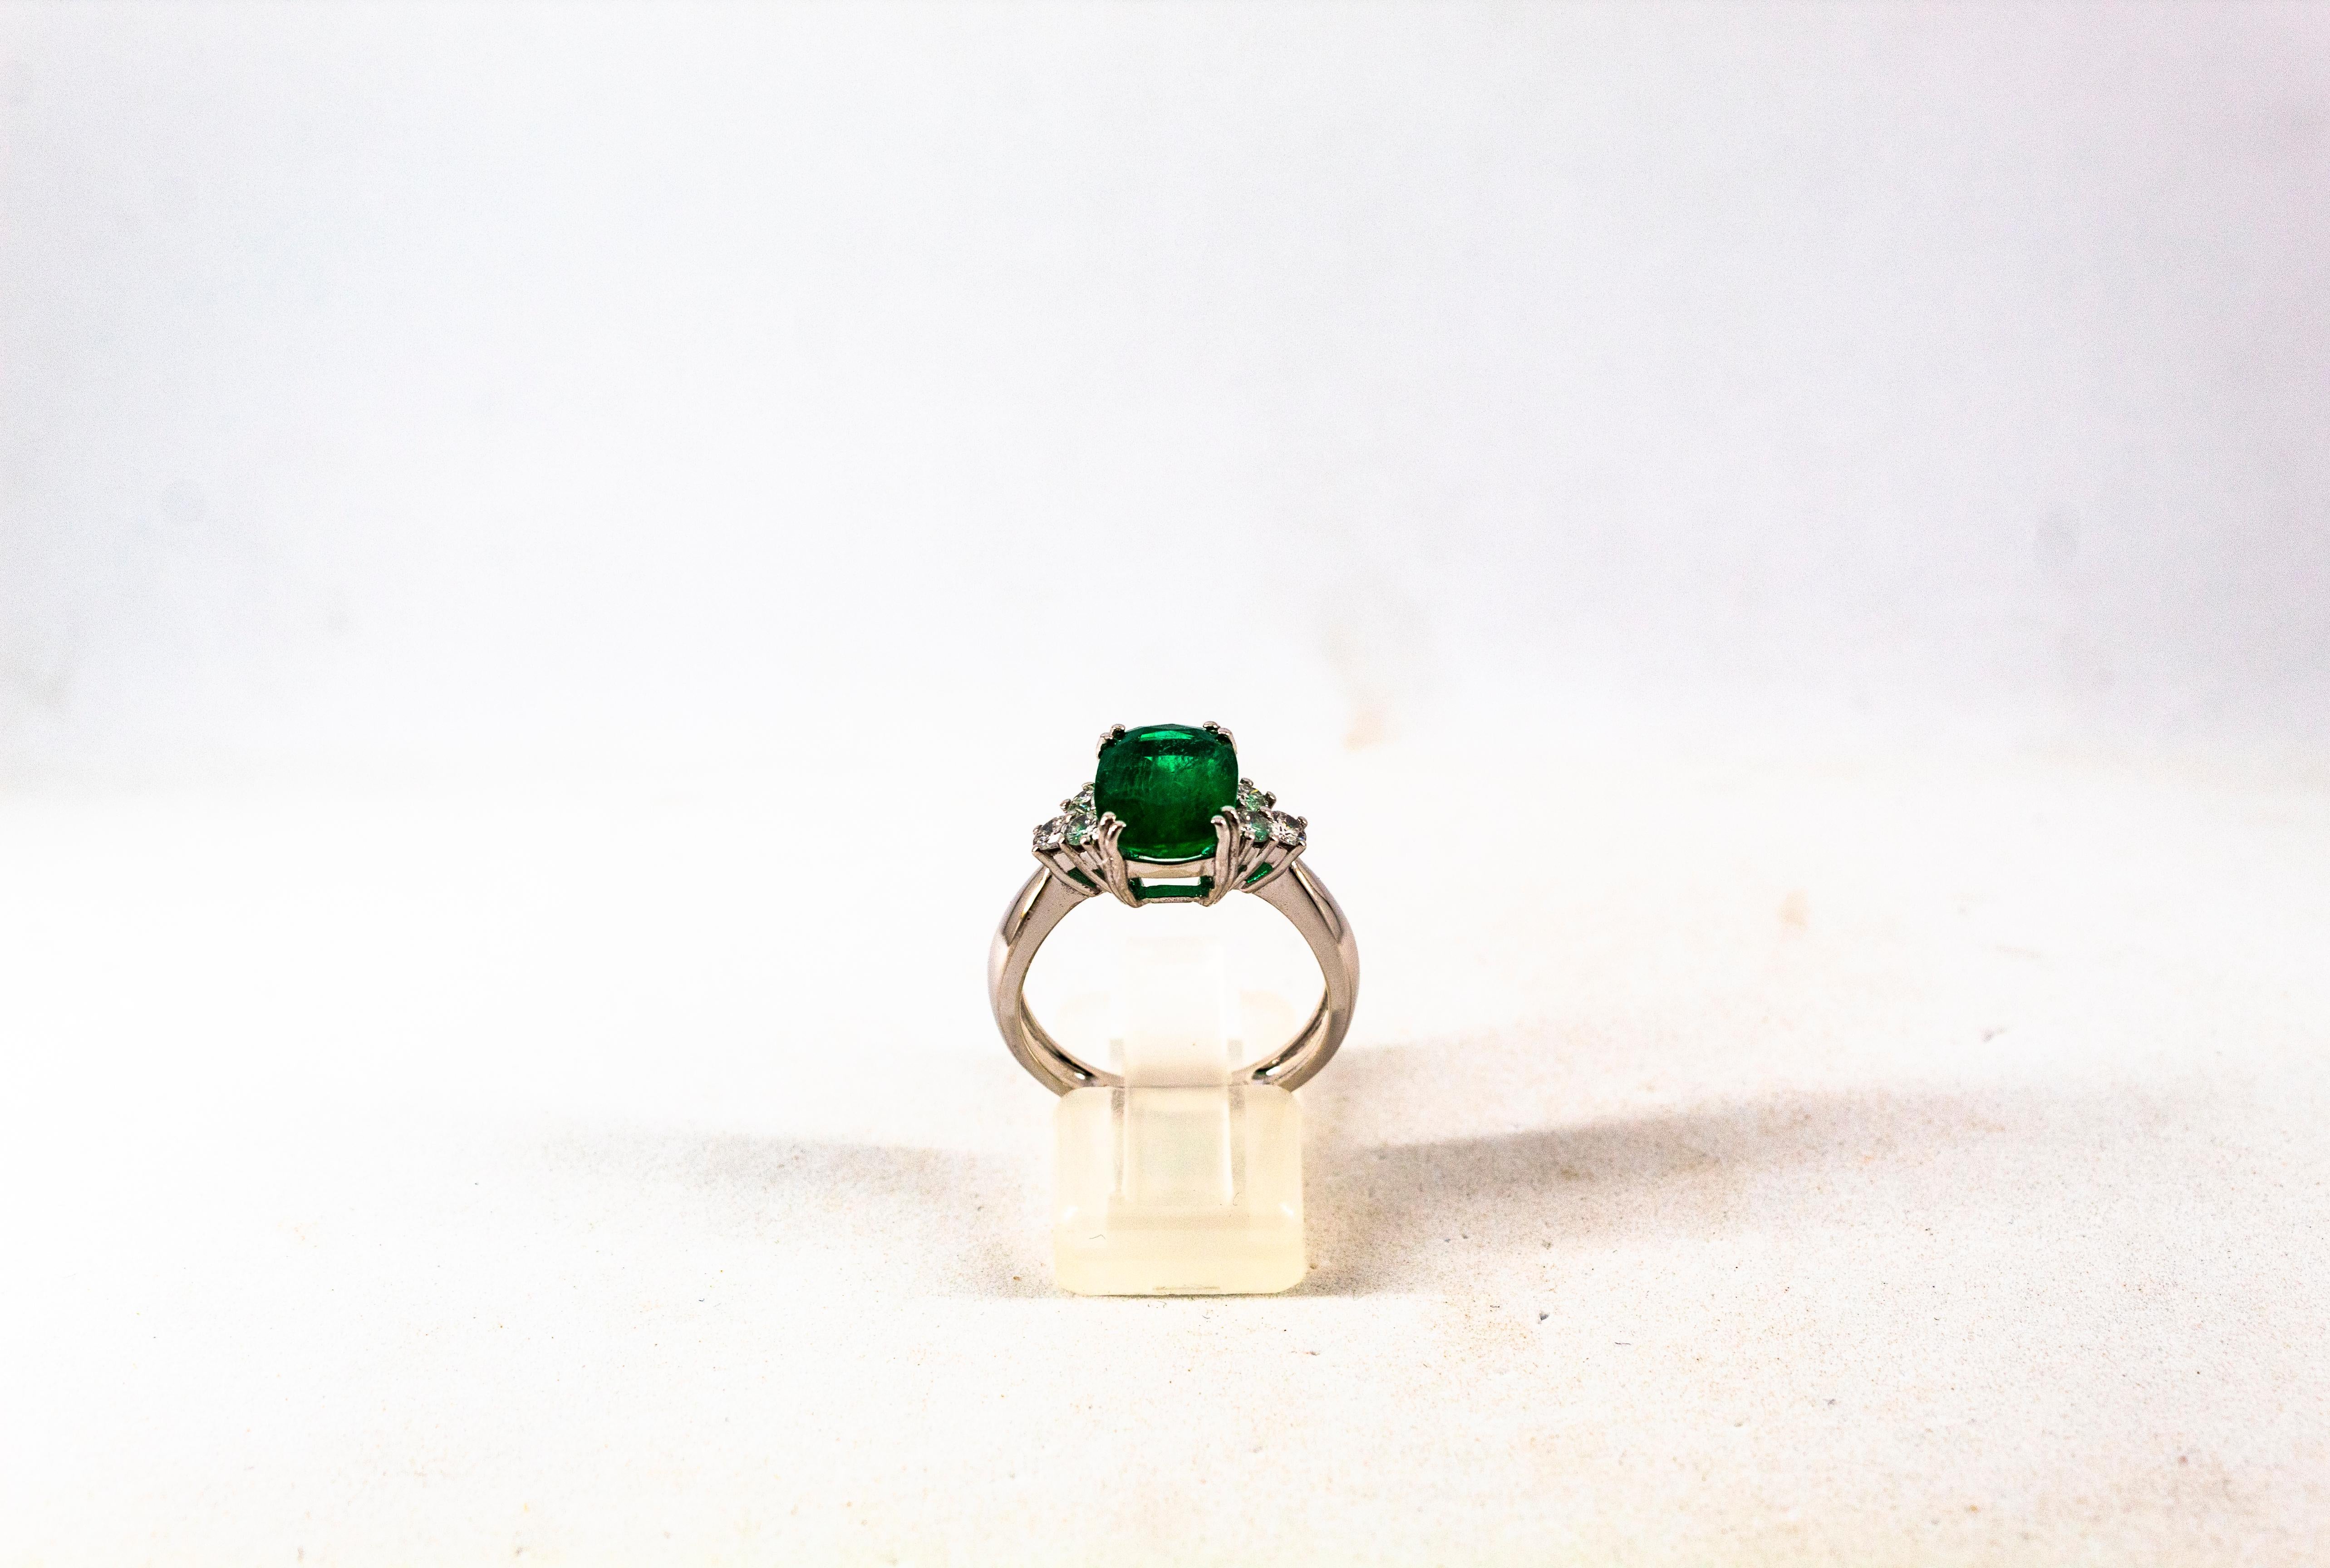 This Ring is made of 18K White Gold.
This Ring has 0.36 Carats of White Modern Round Cut Diamonds. Color: H-G Clarity: VVS1
This Ring has a 3.22 Carats Natural Zambia Cushion Cut Emerald.
This Ring is inspired by Art Deco.
Size ITA: 14.5 USA: